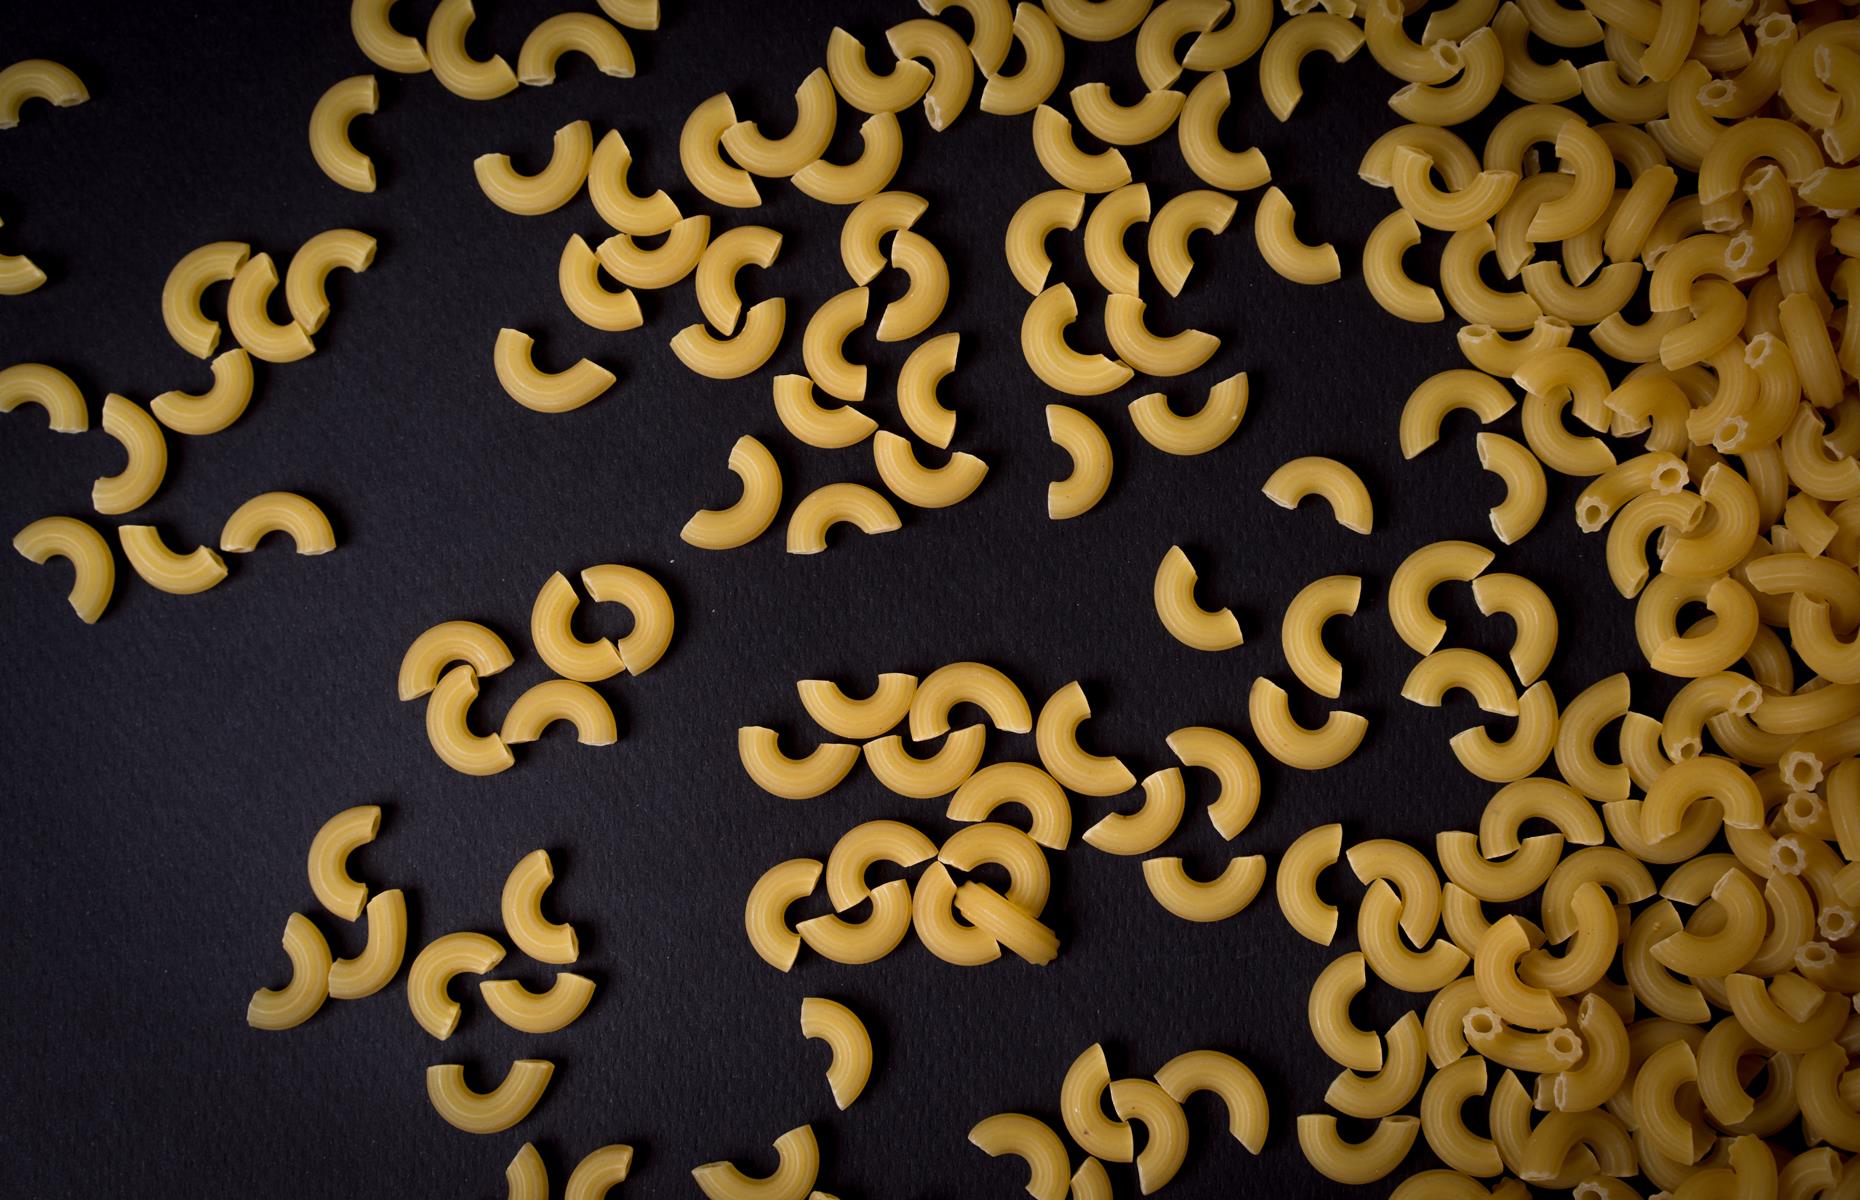 Macaroni comes in different shapes and sizes. Long, short, curly and ridged tubes are suitable for the dish but it's the curved elbow macaroni that's used most often. Other types of pasta such as campanelle, conchiglie and penne are also good because these shapes collect sauce, though purists argue that without macaroni it's just a cheesy bake. Avoid miniature shapes as these can become mushy.